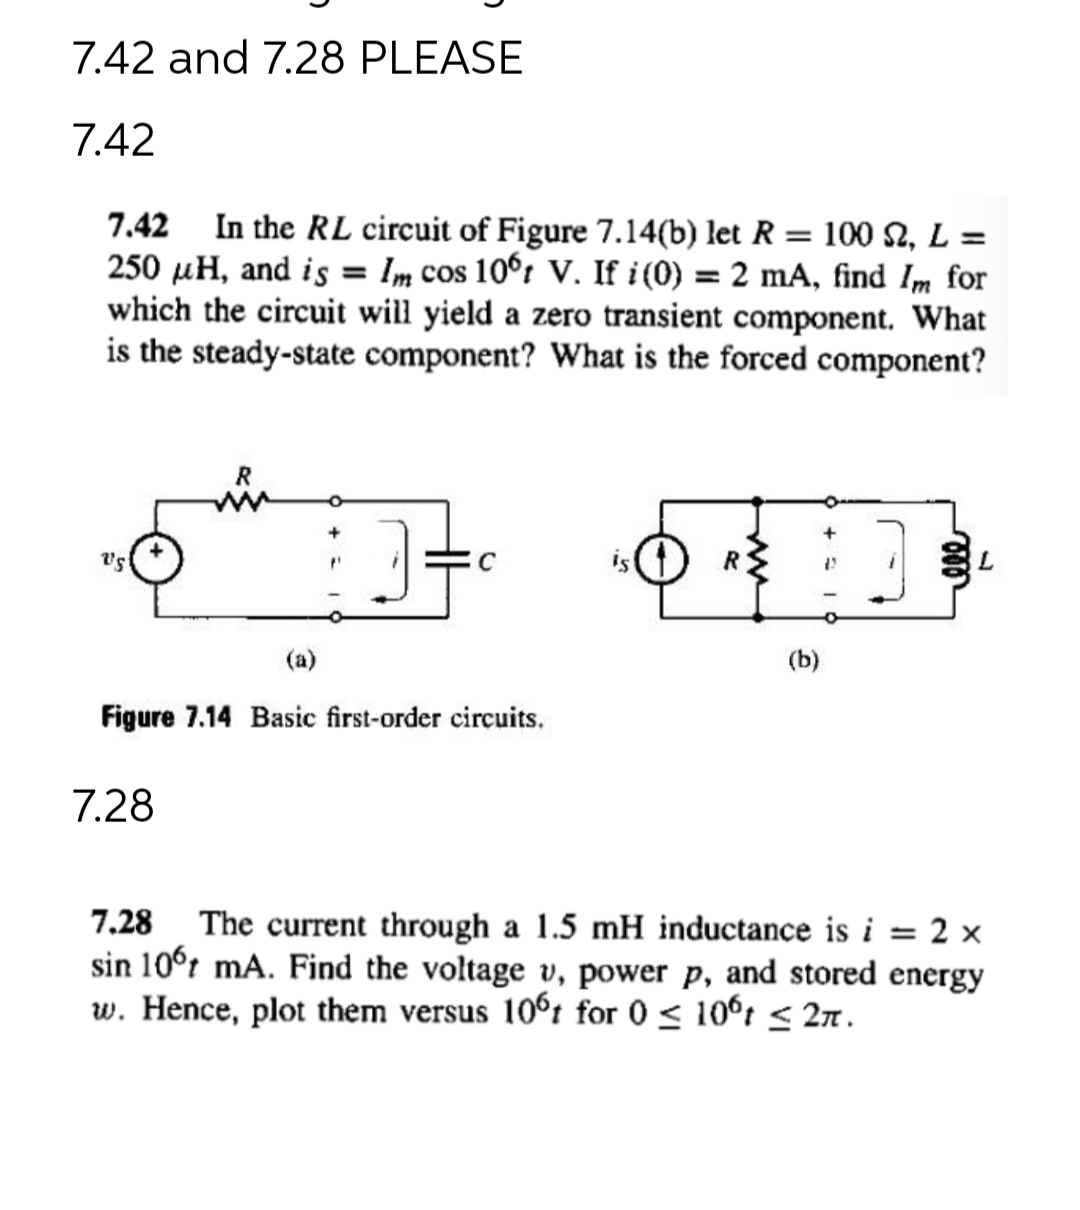 7.42 and 7.28 PLEASE
7.42
7.42 In the RL circuit of Figure 7.14(b) let R = 100 S2, L =
250 μH, and is = Im cos 10ºt V. If i (0) = 2 mA, find Im for
which the circuit will yield a zero transient component. What
is the steady-state component? What is the forced component?
Vs
R
7.28
J
(a)
Figure 7.14 Basic first-order circuits.
R
(b)
ell
L
7.28 The current through a 1.5 mH inductance is i = 2 x
sin 106 mA. Find the voltage v, power p, and stored energy
w. Hence, plot them versus 10°t for 0 ≤ 10°t ≤ 2π.